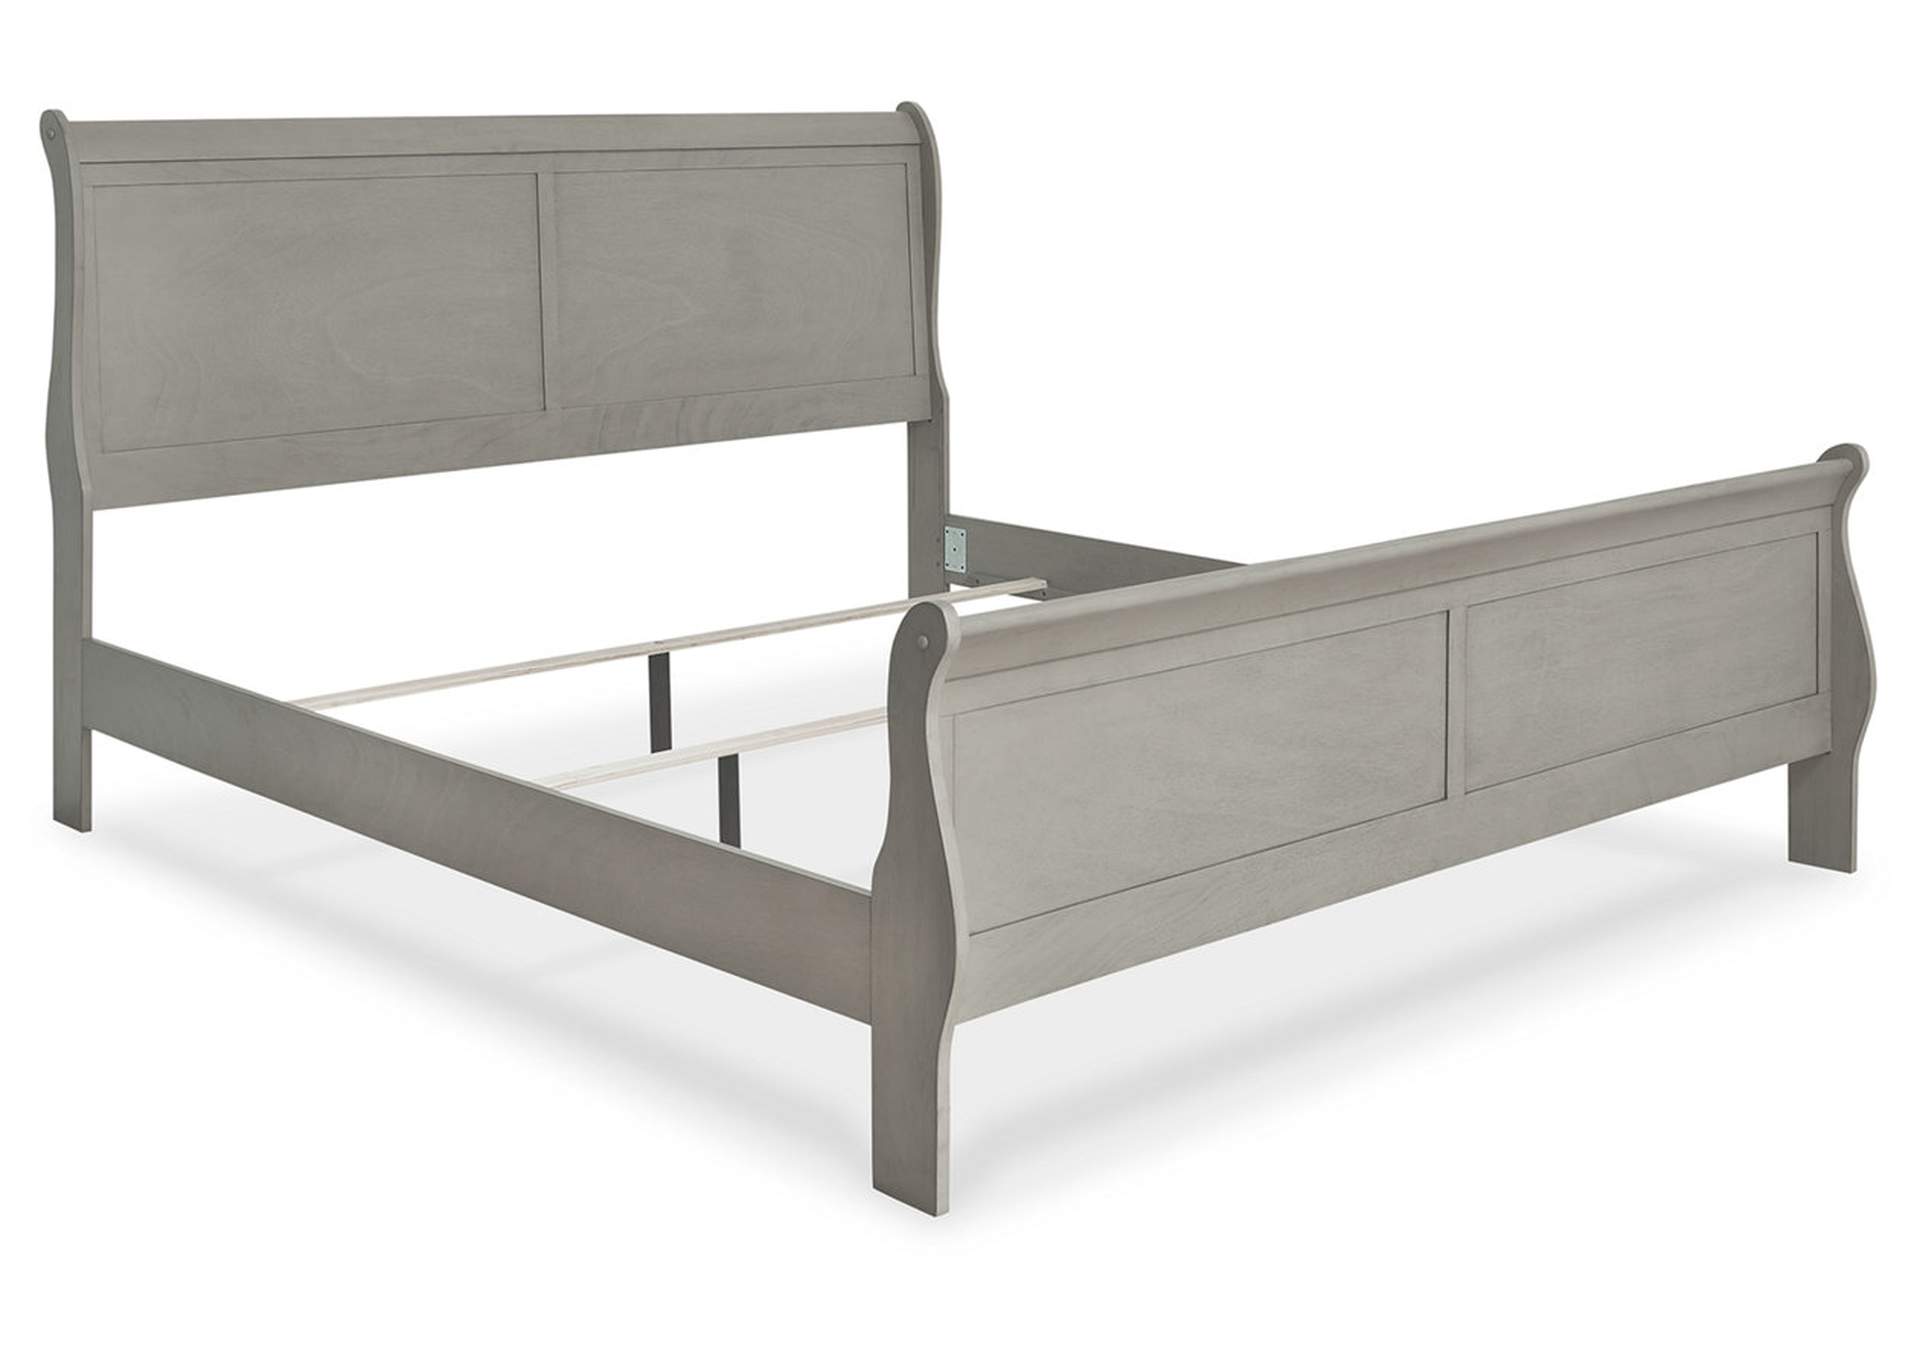 Kordasky California King Sleigh Bed,Signature Design By Ashley